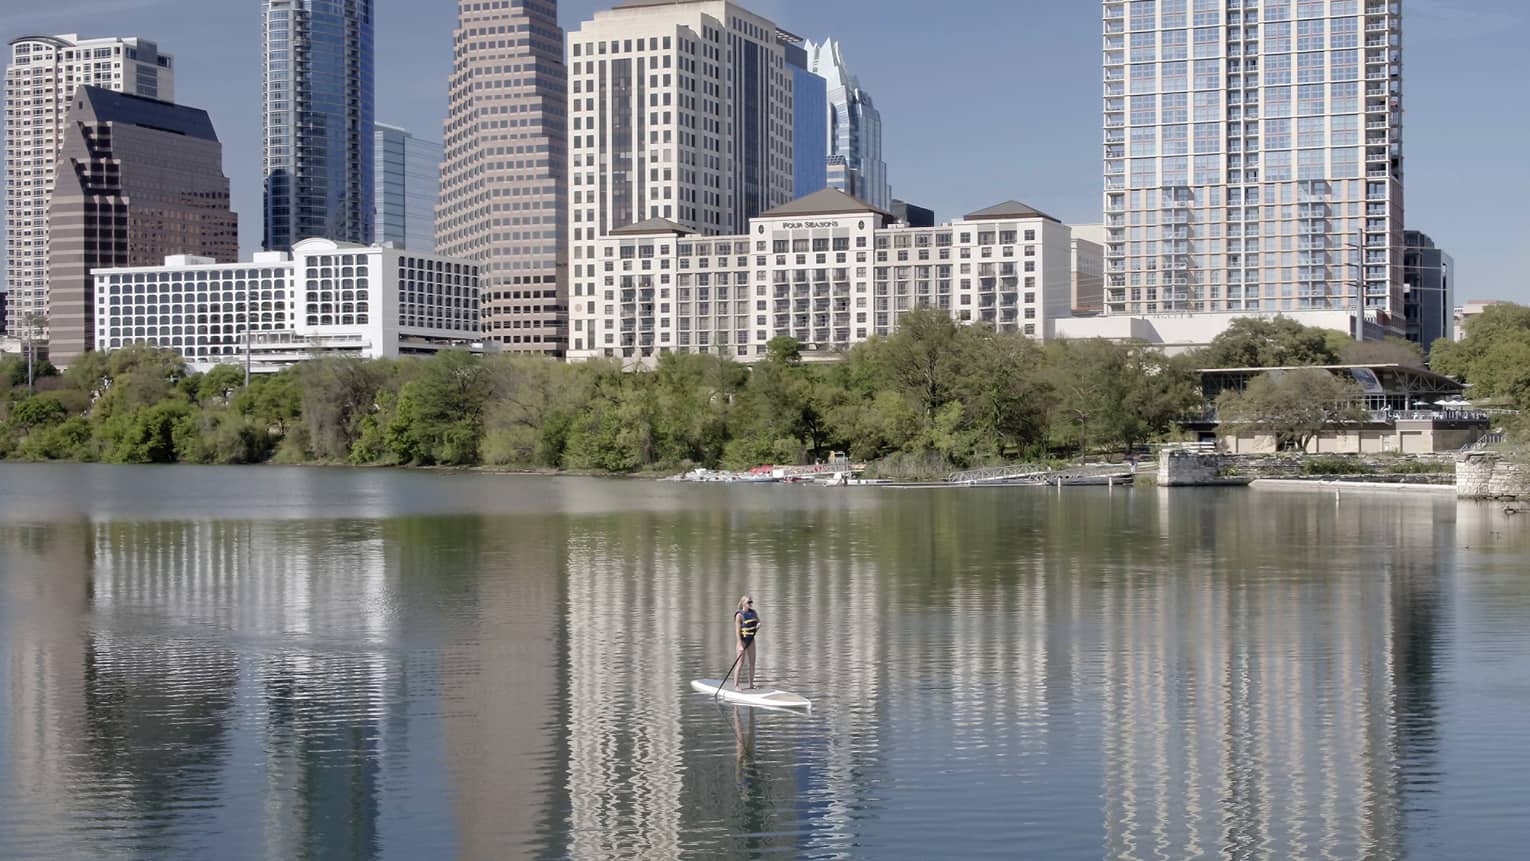 Person stand up paddleboarding on lake, Austin city skyline in background